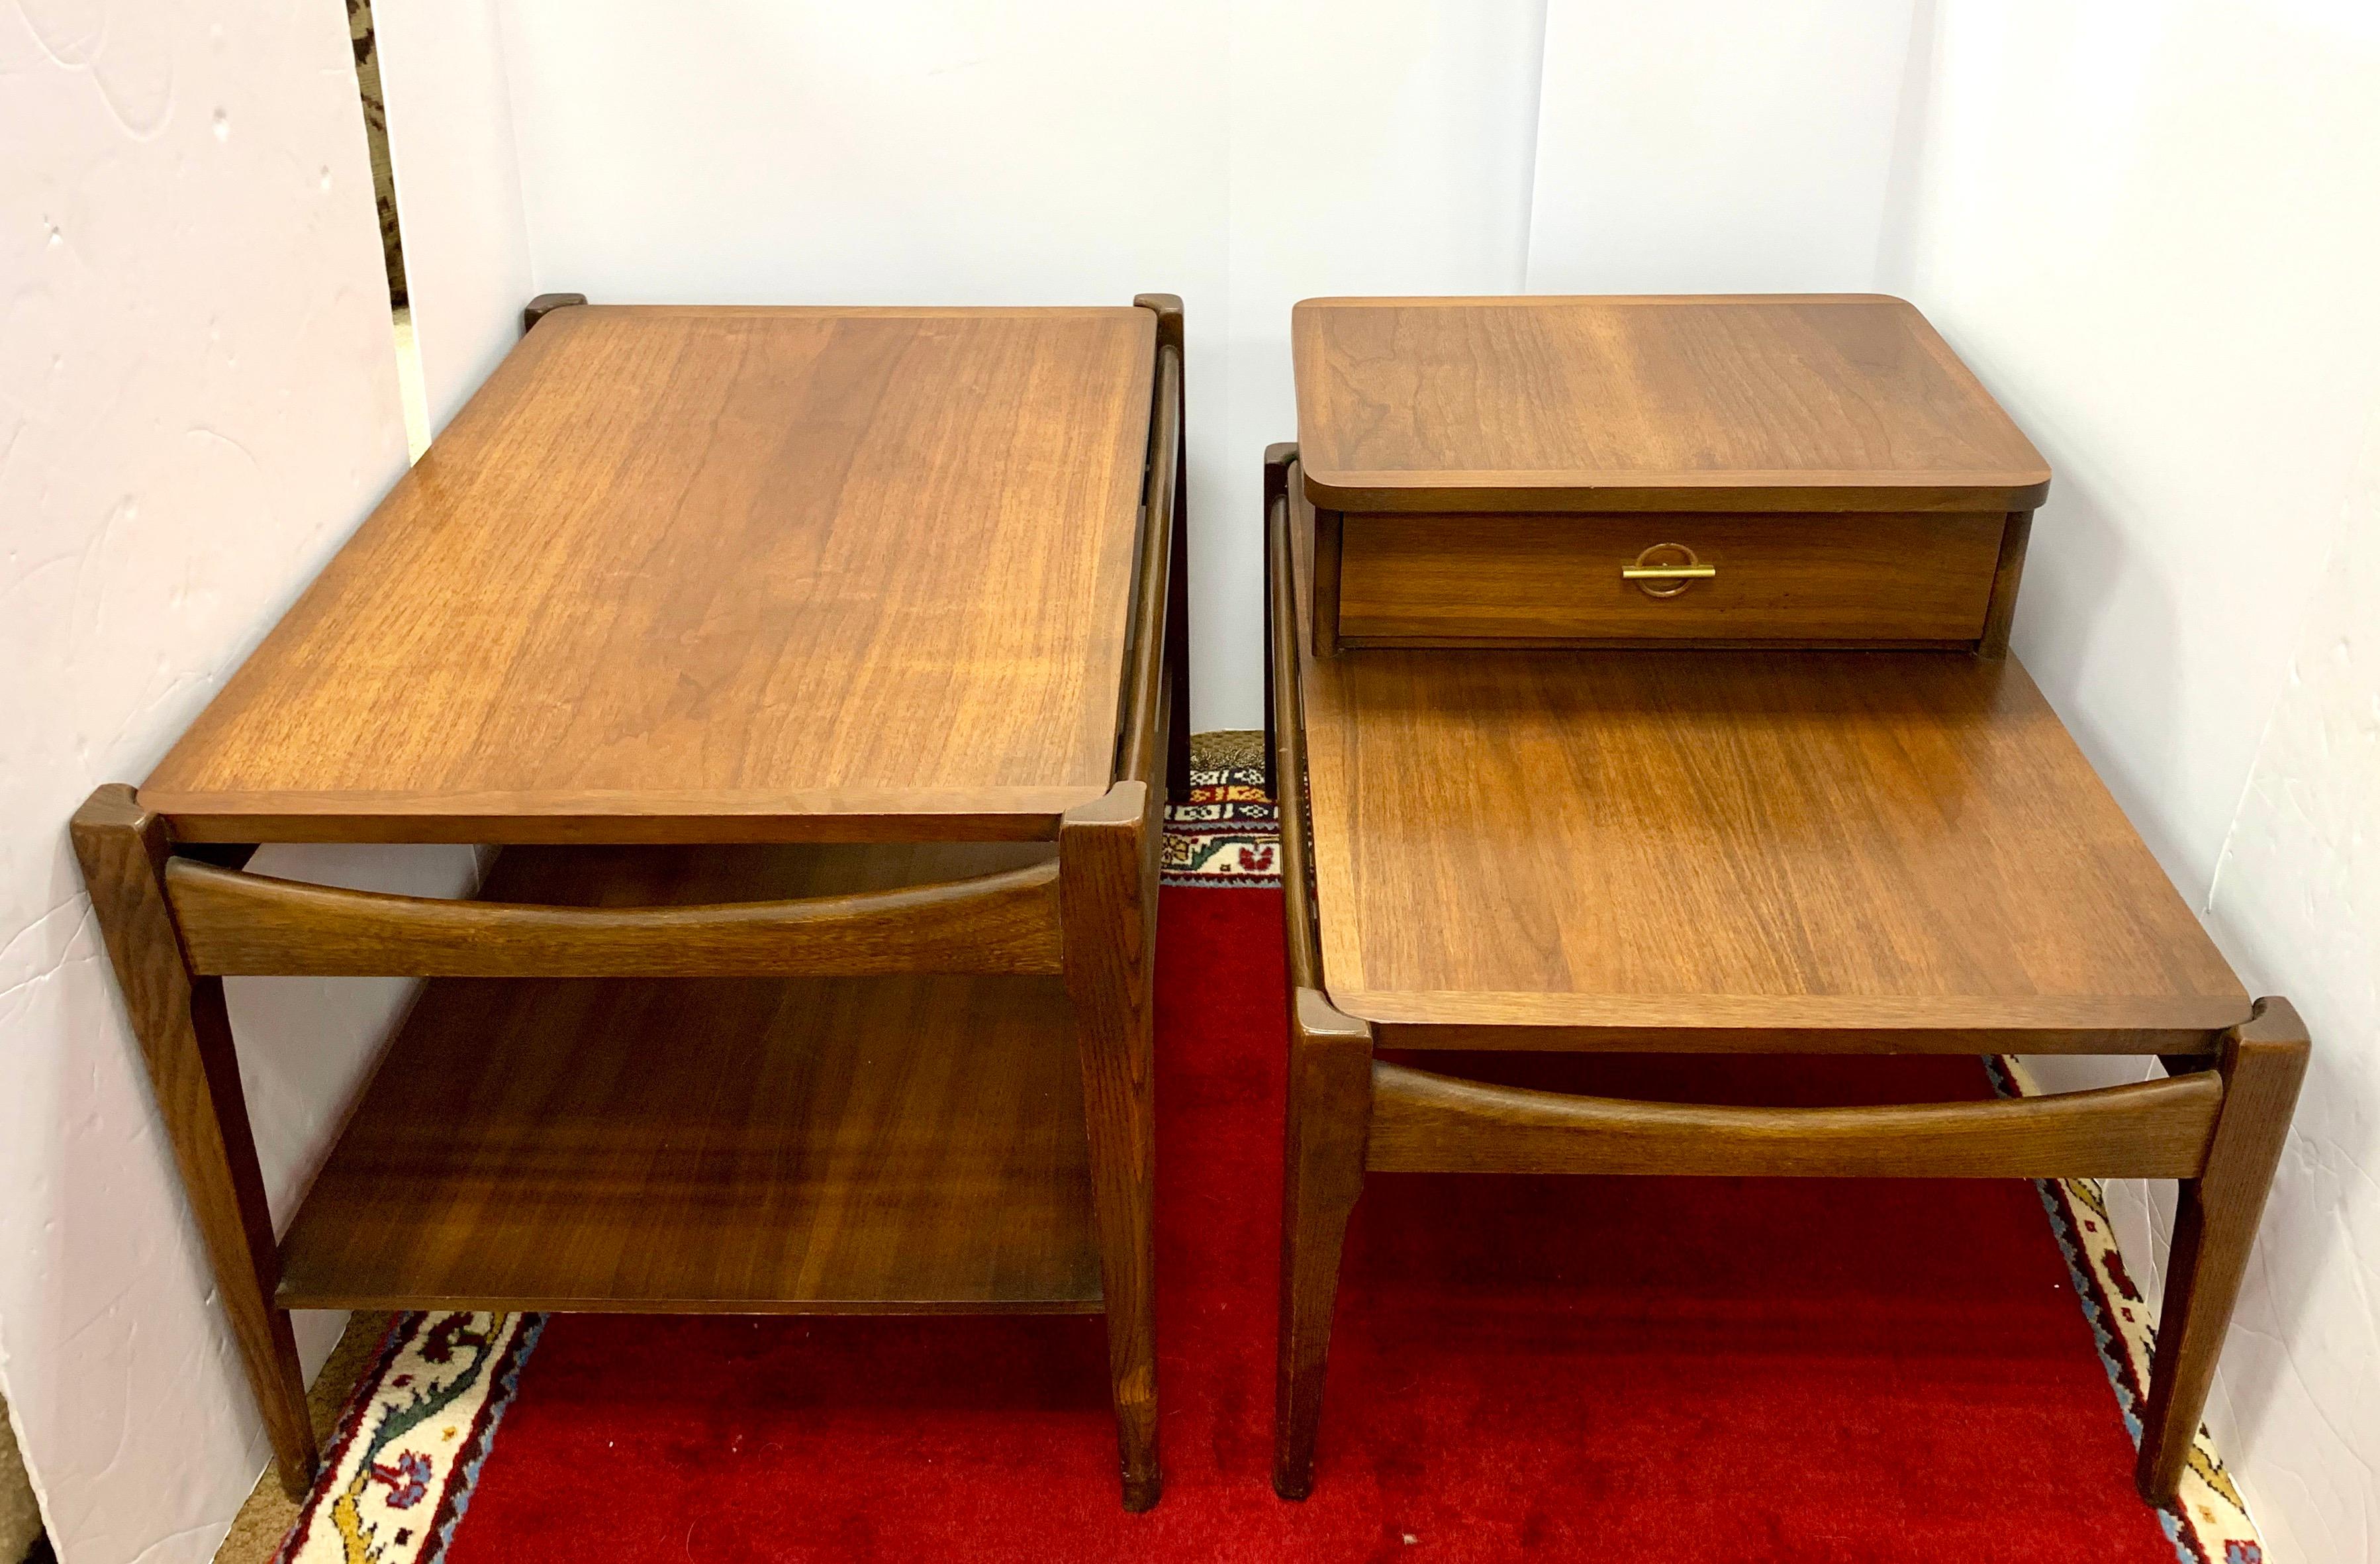 Vintage pair of Bassett 1970s midcentury teak nightstands. While they have the same dimensions, they are different in terms of shape, see pics.